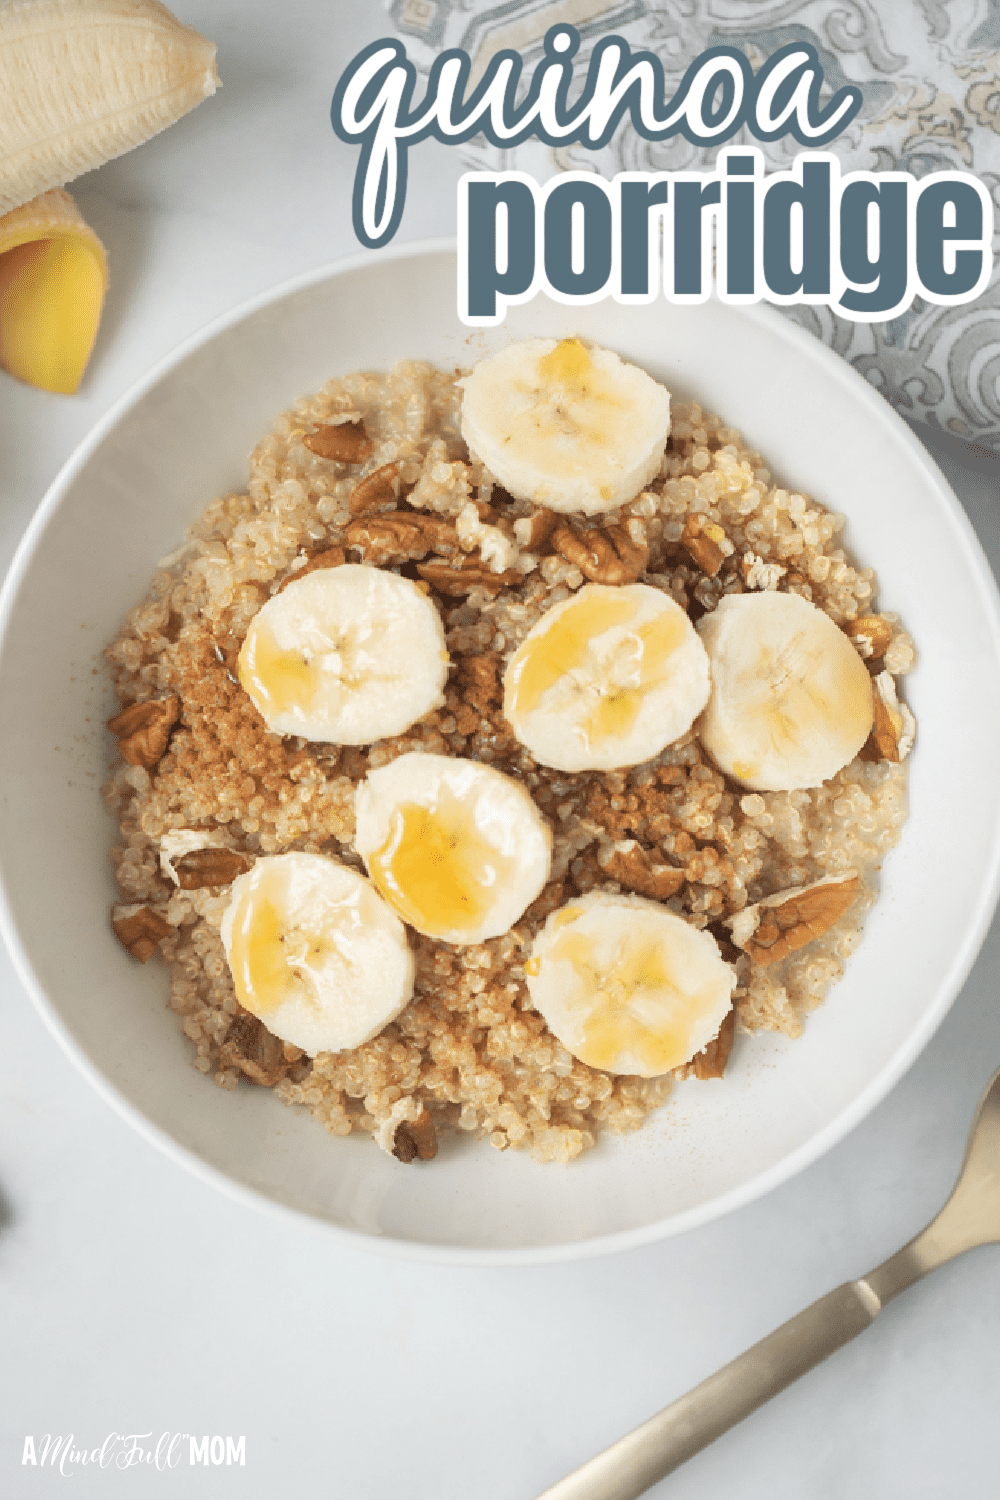 Start your day off on the right foot with a bowl of Quinoa Porridge. This nutritious breakfast porridge is packed with protein, calcium, fiber, and nutrients and is both satisfying and delicious. 